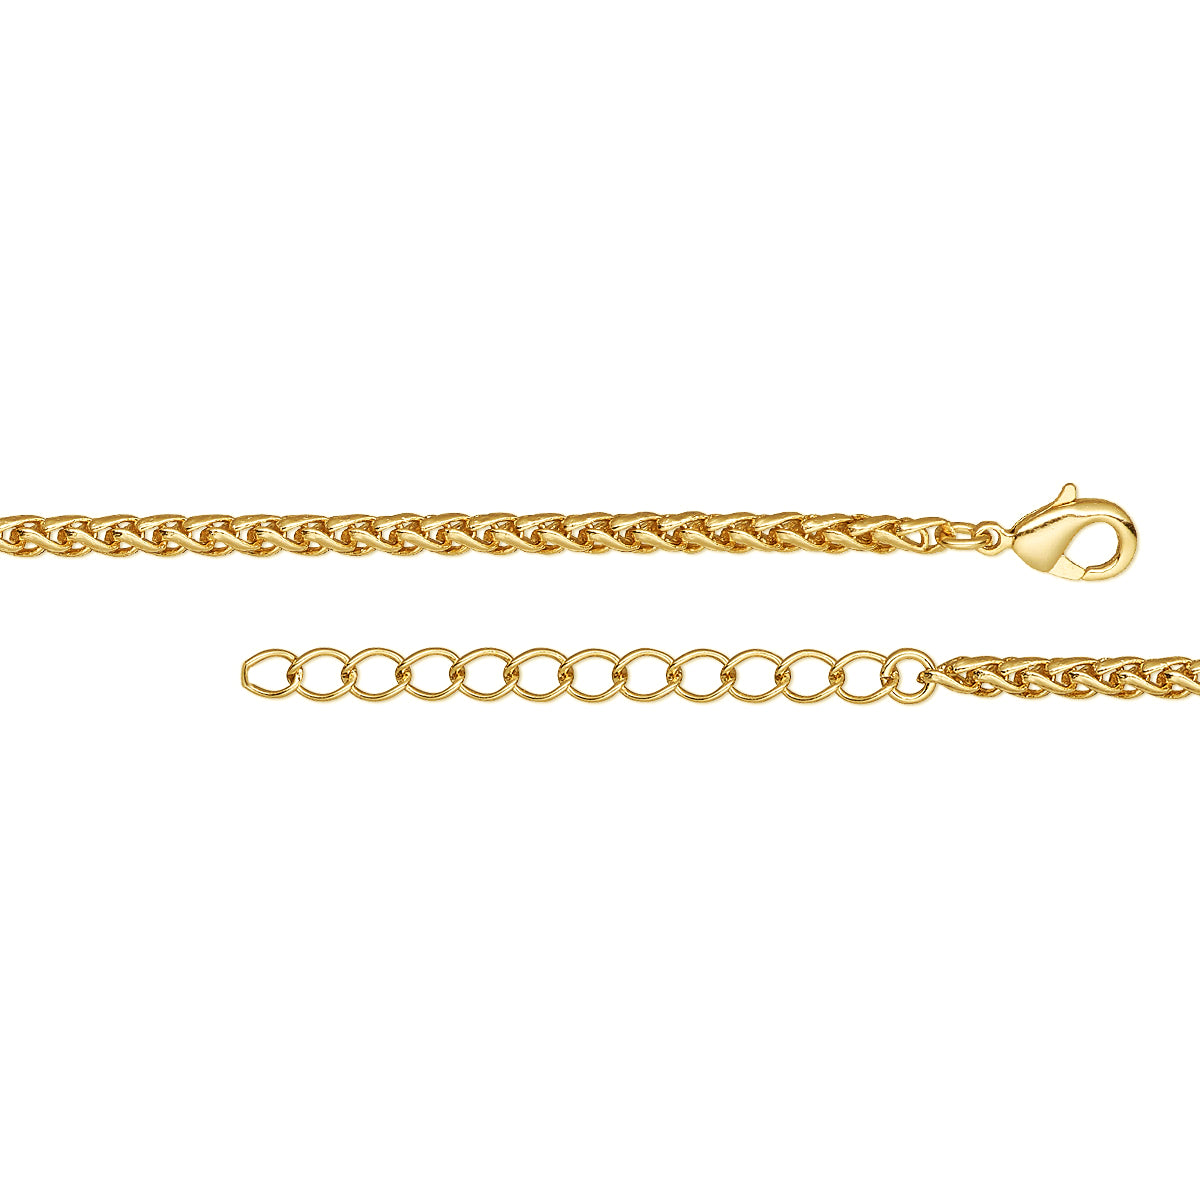 2 Inch Extender Chain, 5cm Extension Chain, Necklace Extender, Tail Chain  Silver, Gold, Bronze, Copper, Gun Metal, Steel, Rose Gold 